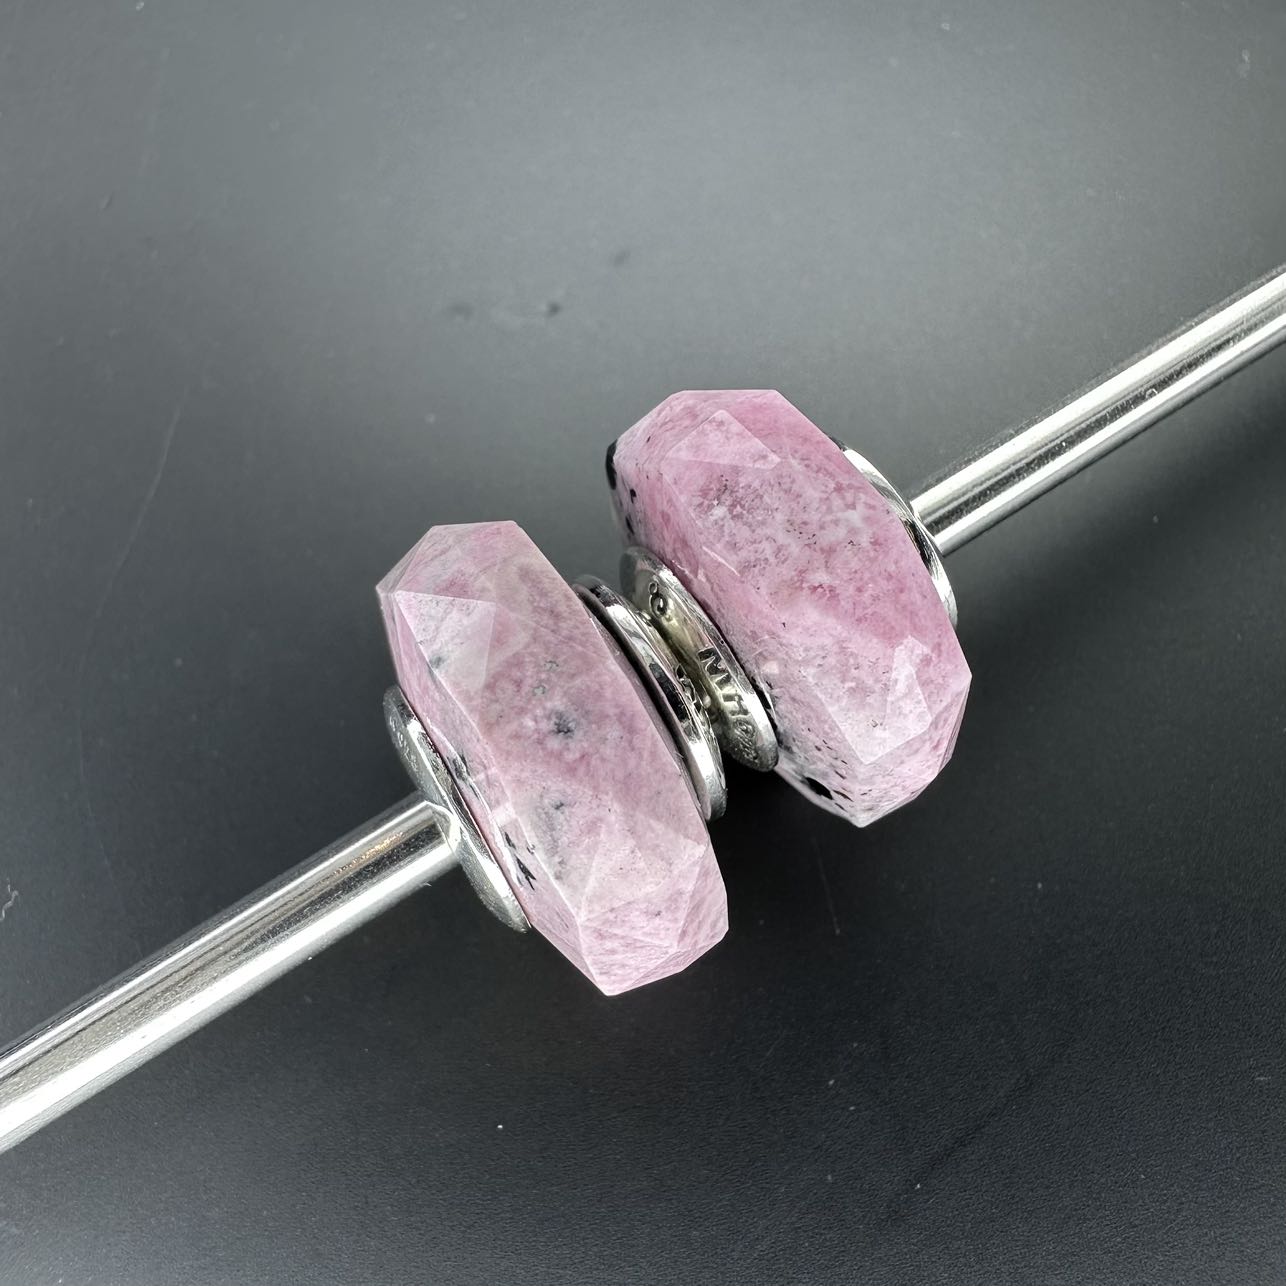 Ohmnique - Softness Touched ( Rhodonite ) - Only 2 pieces